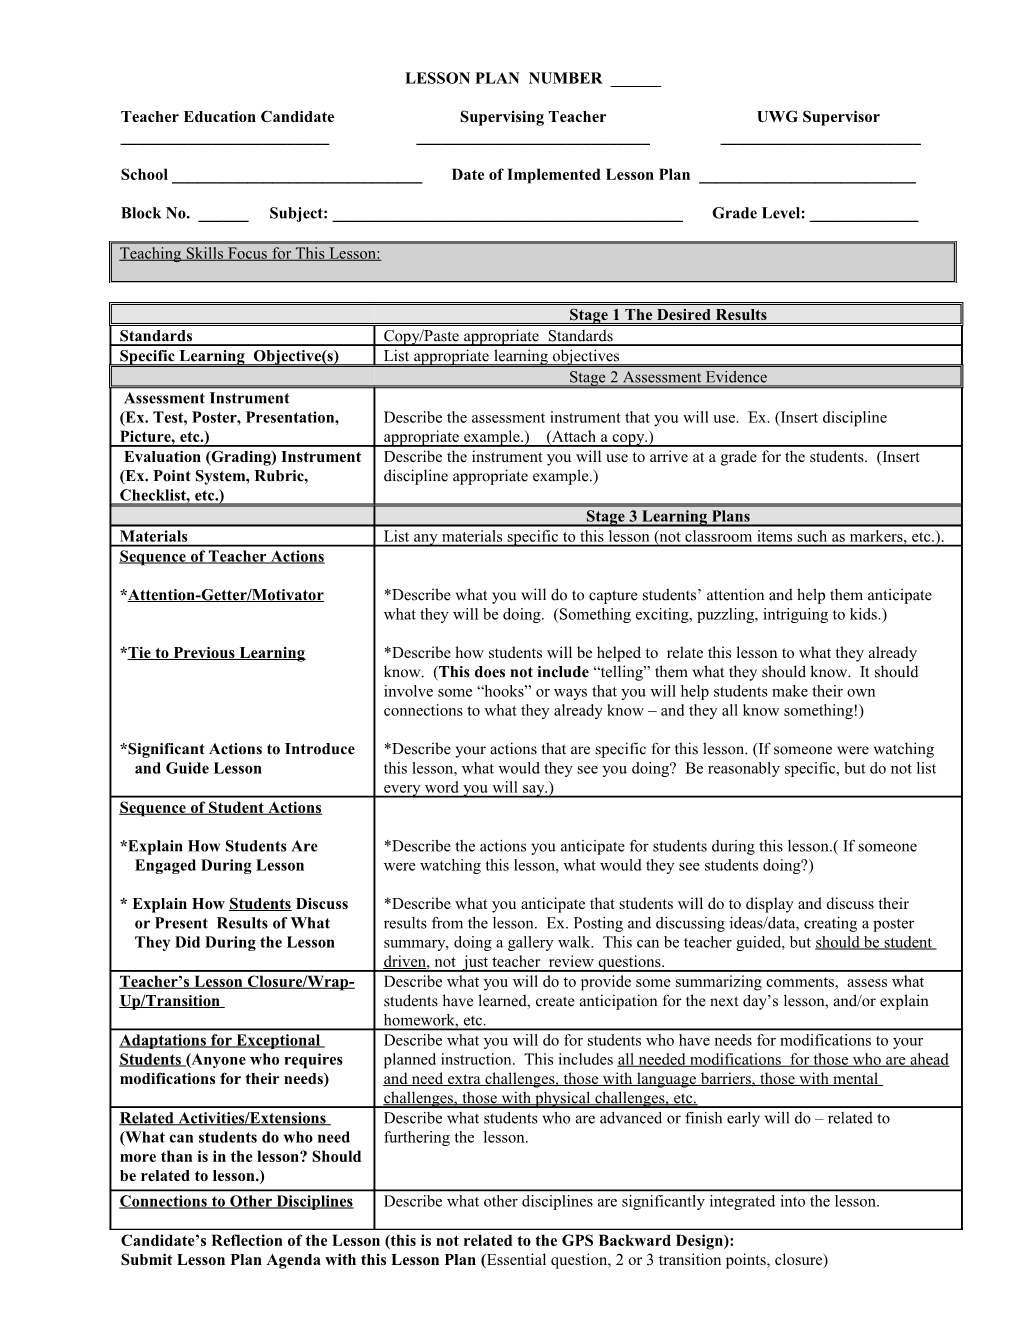 Lesson Planning Template s6